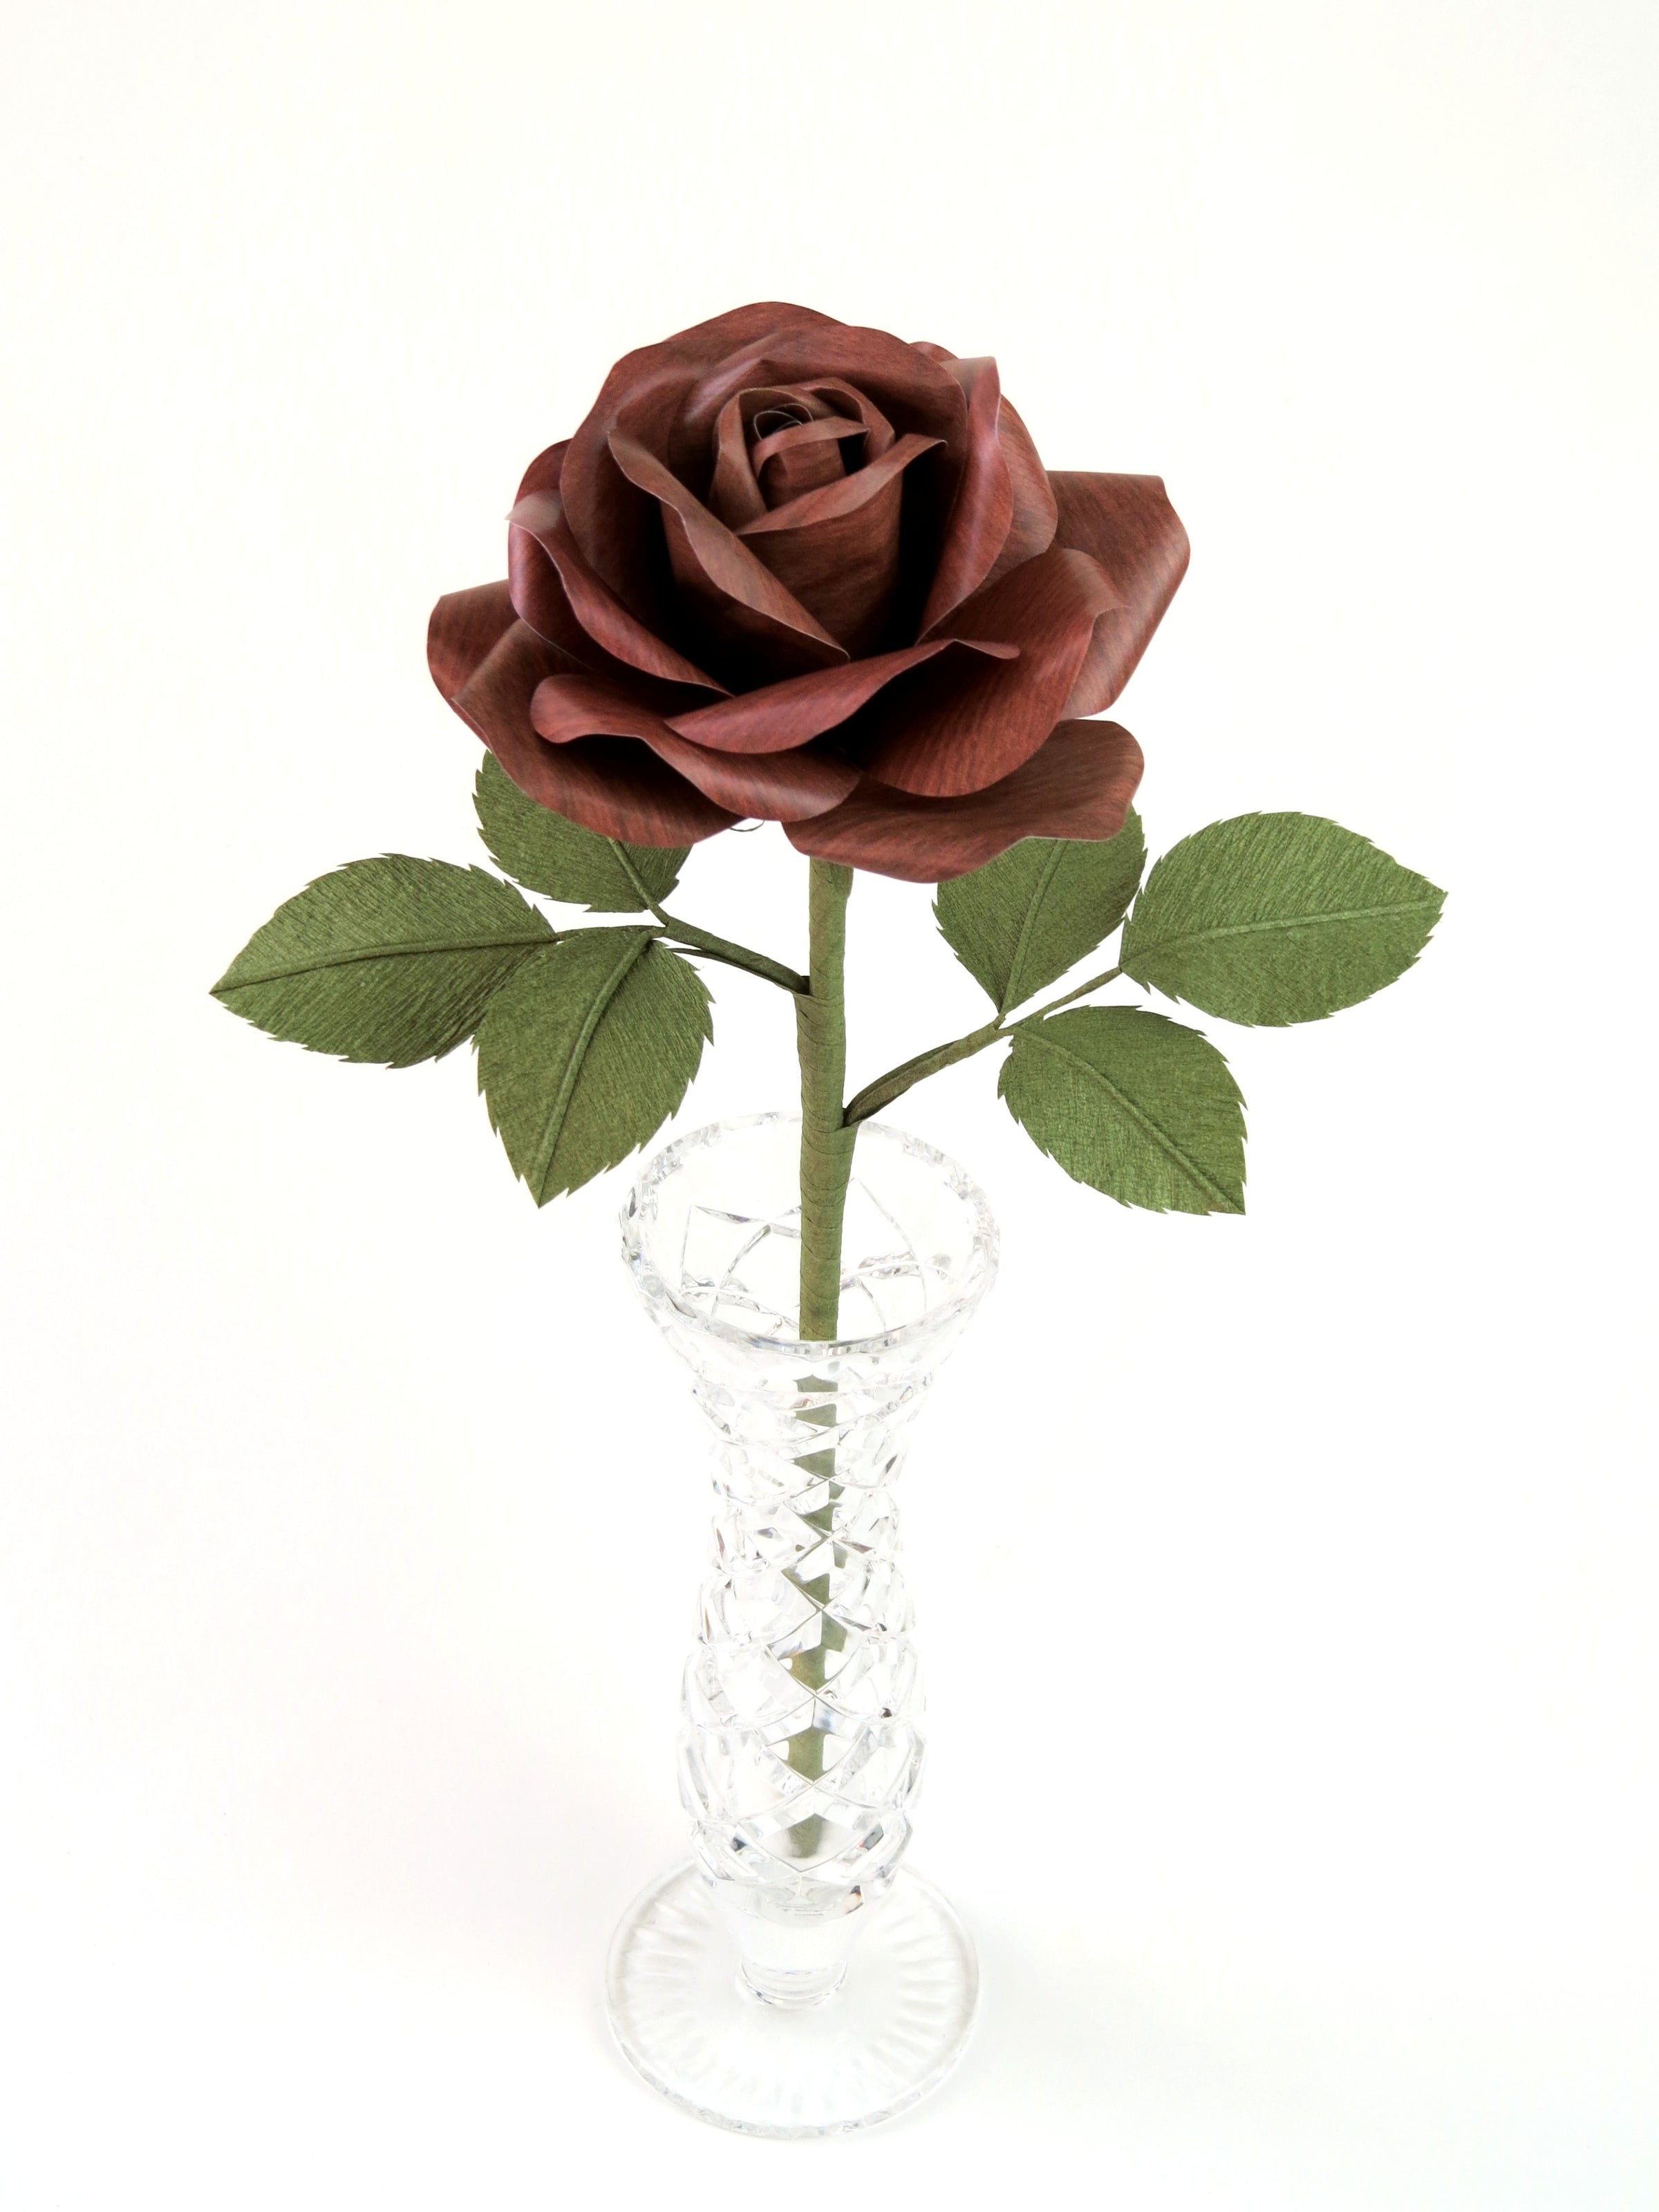 Dark wood grain paper rose with six green leaves standing in a narrow glass vase set against a white background